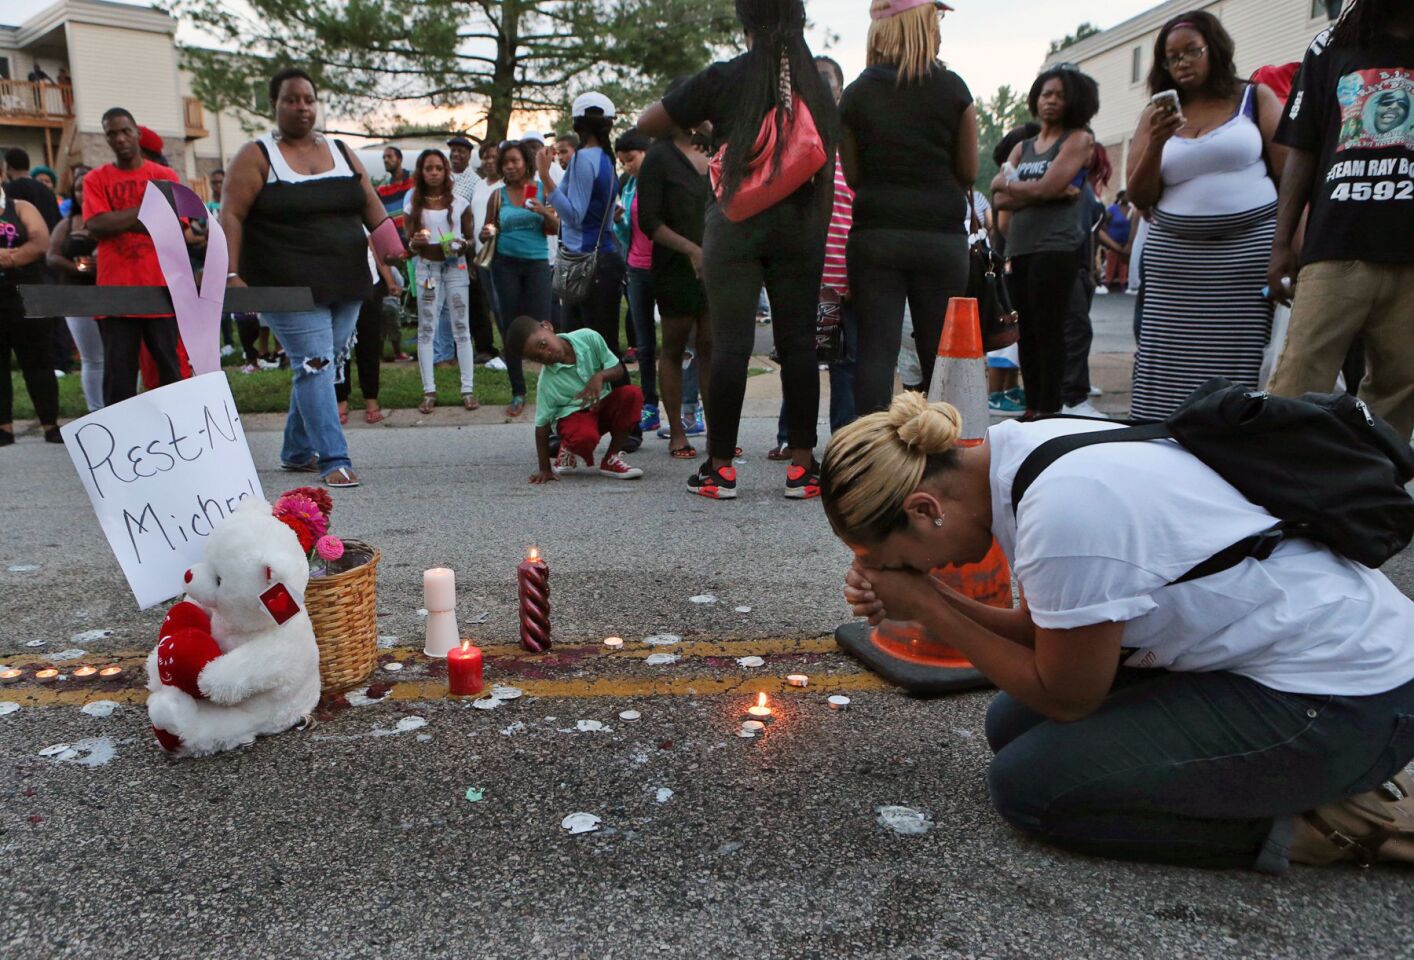 Meghan O'Donnell prays at the spot where Michael Brown was killed, Sunday evening in Ferguson, Mo.